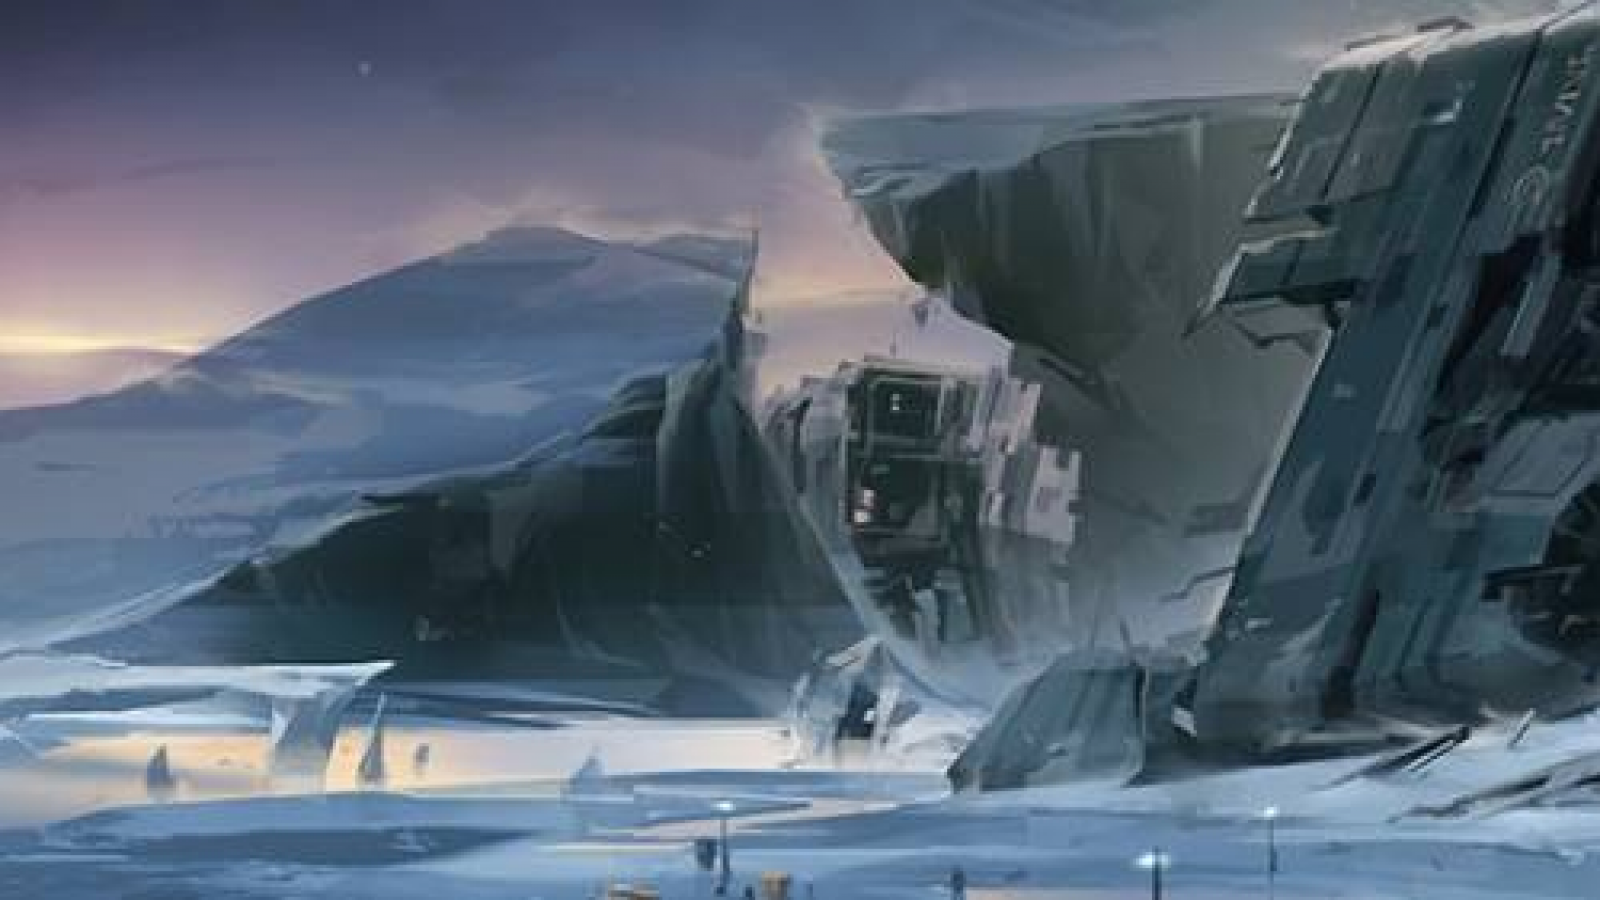 Building Warframe: The Ice Planet